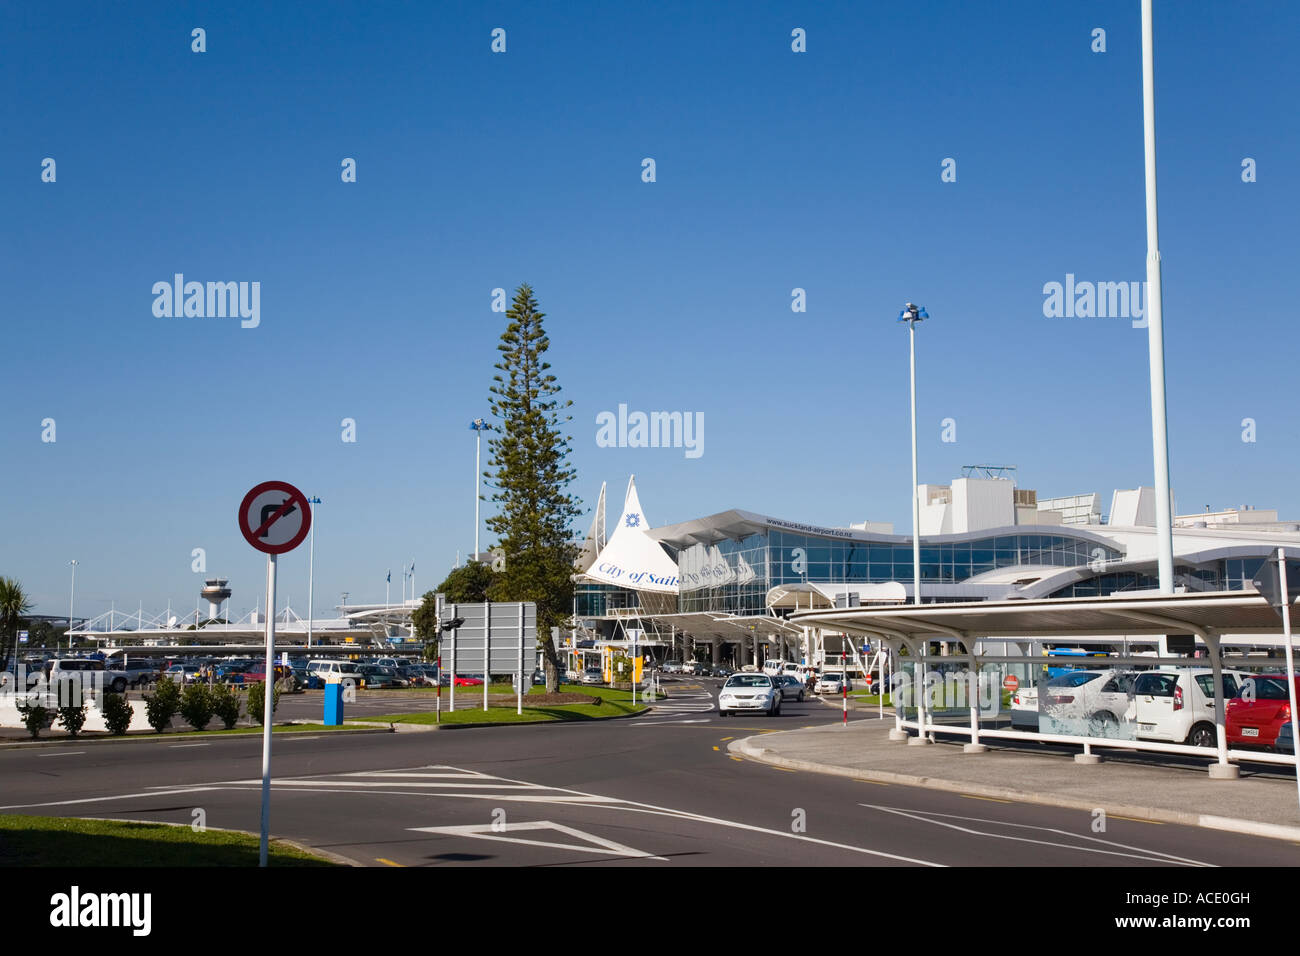 International Airport arrivals departures terminal buildings road for 'City of Sails' Auckland North Island New Zealand Stock Photo